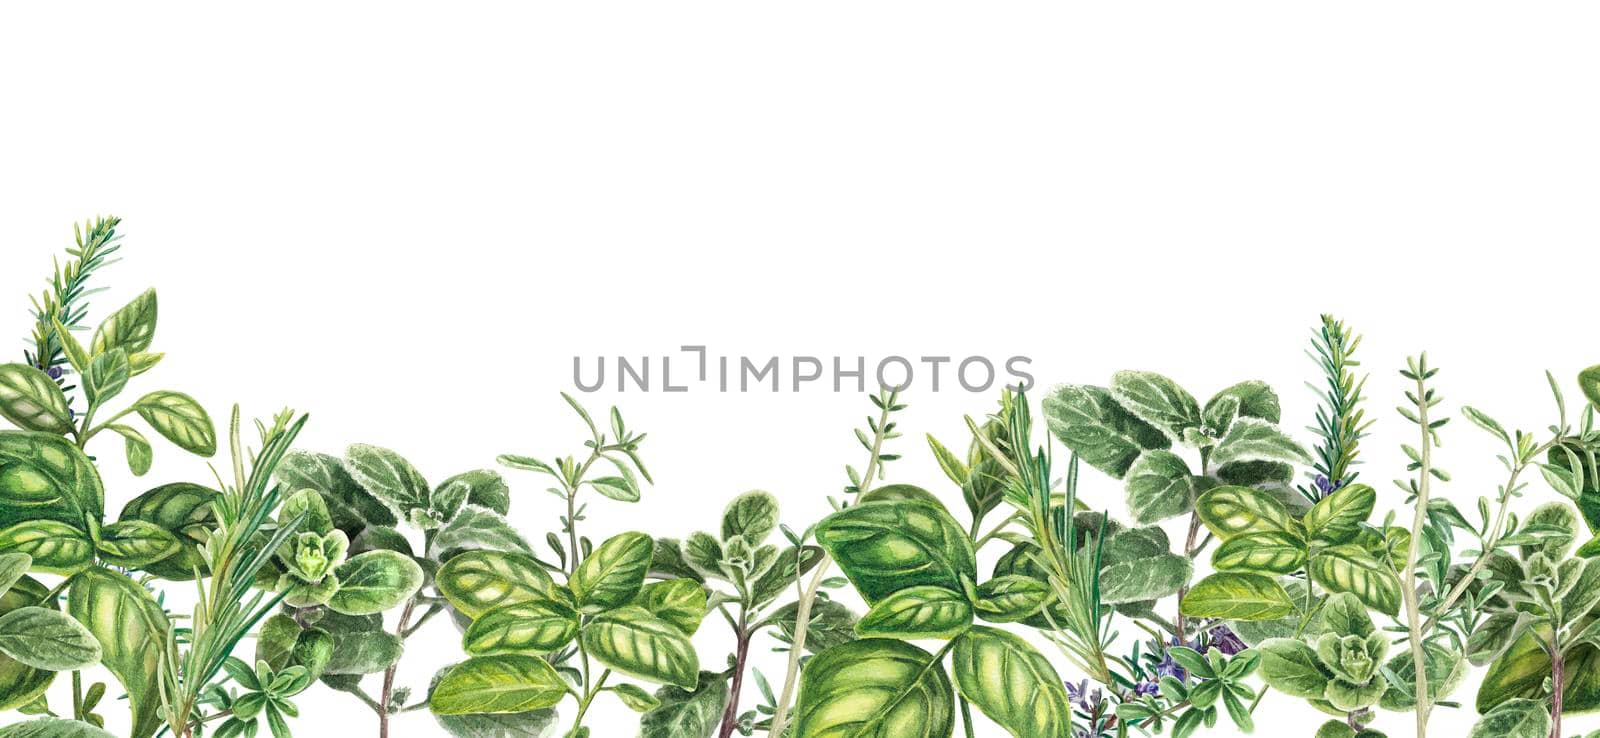 Banner made of fresh Provencal herbs. Seamless horizontal background with basil, marjoram, cumin, rosemary. Watercolor illustration of realistic plants. Suitable for postcards, menus, textiles, pack